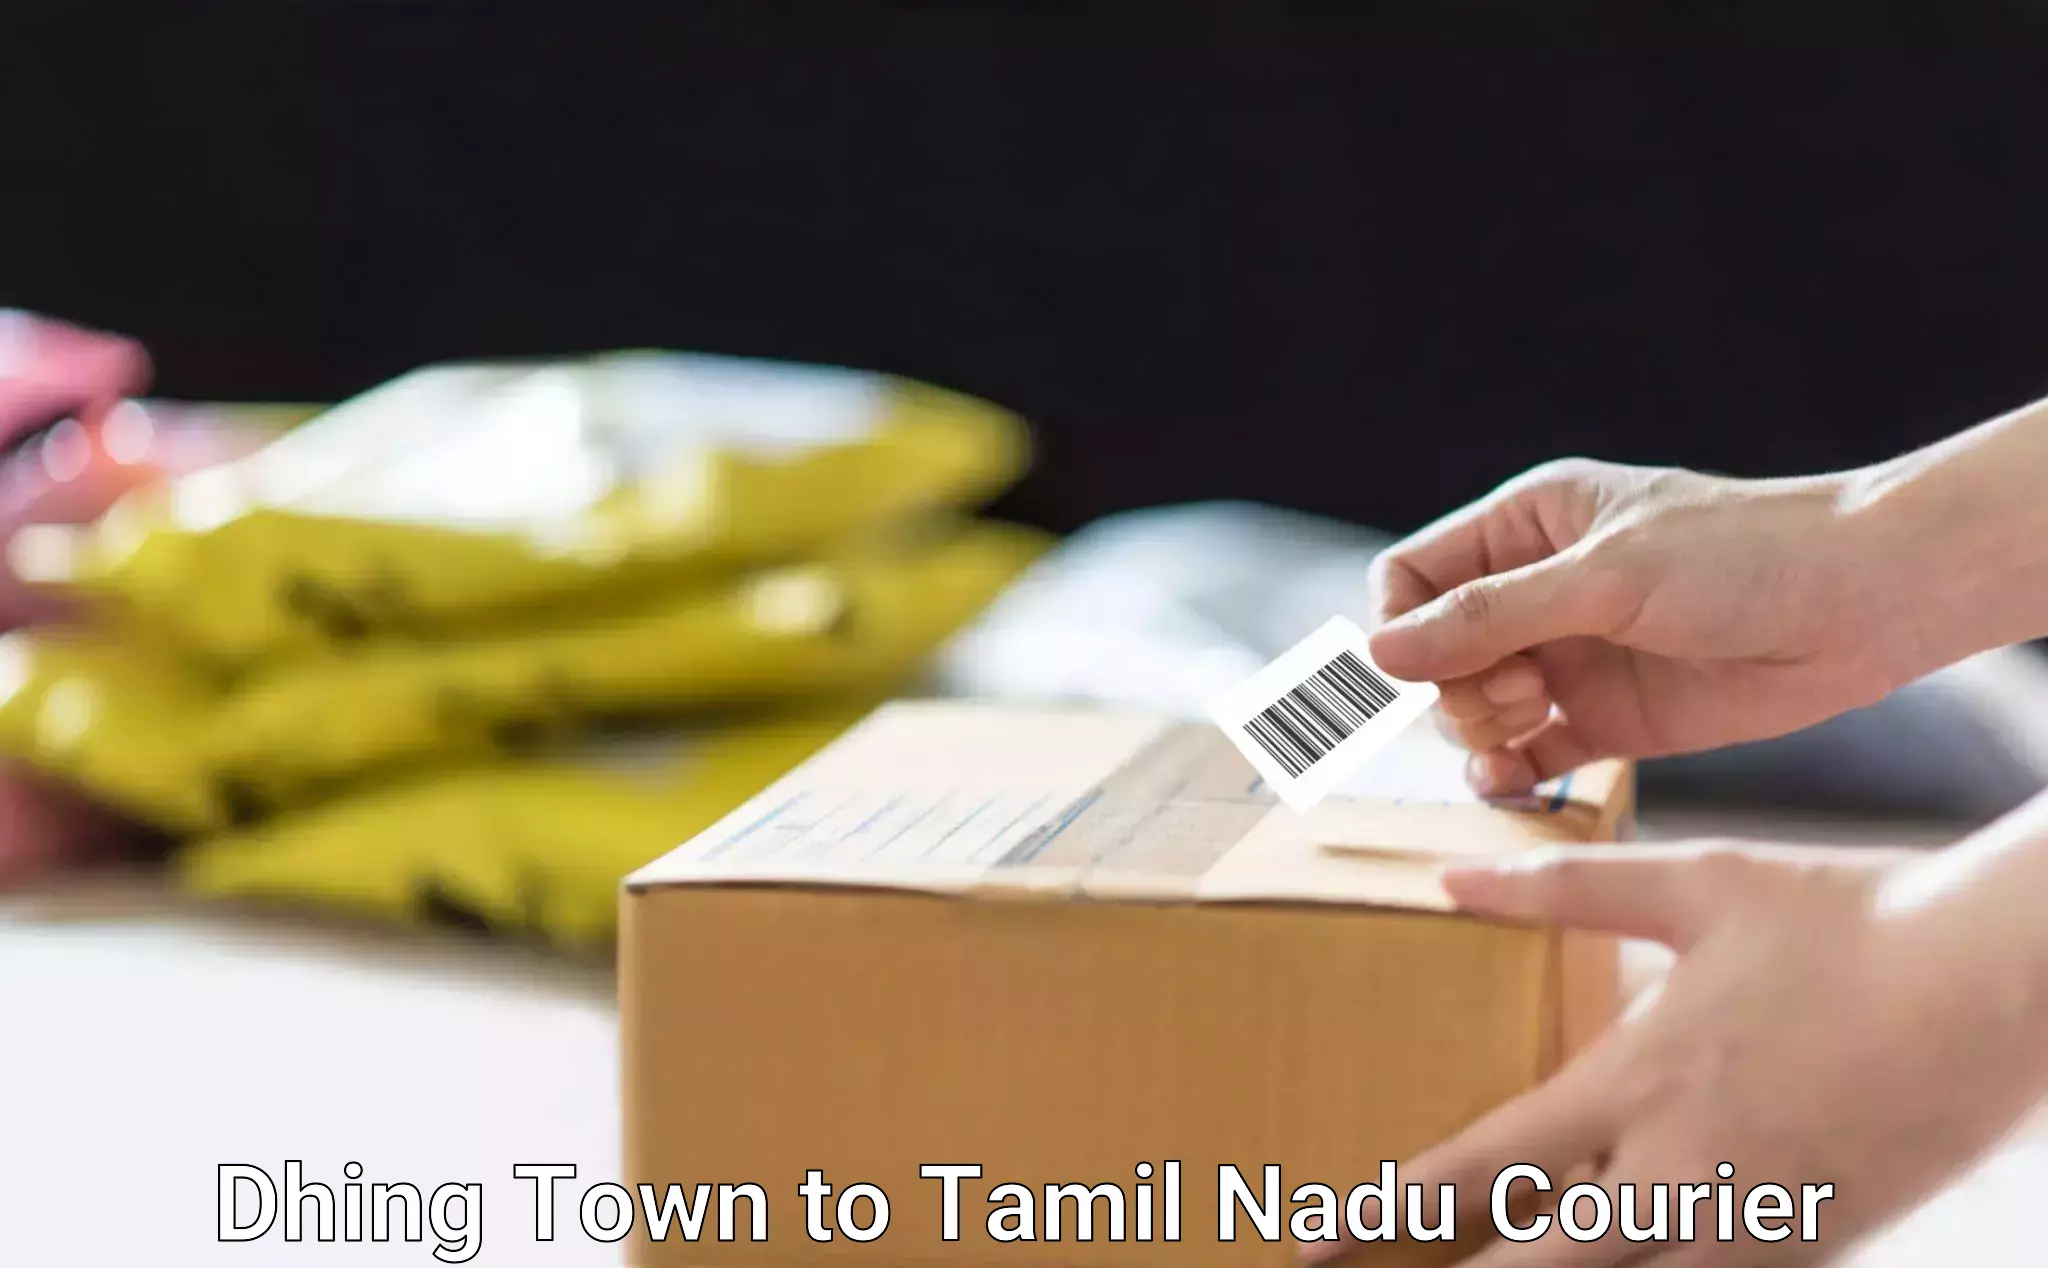 High-priority parcel service Dhing Town to Memalur